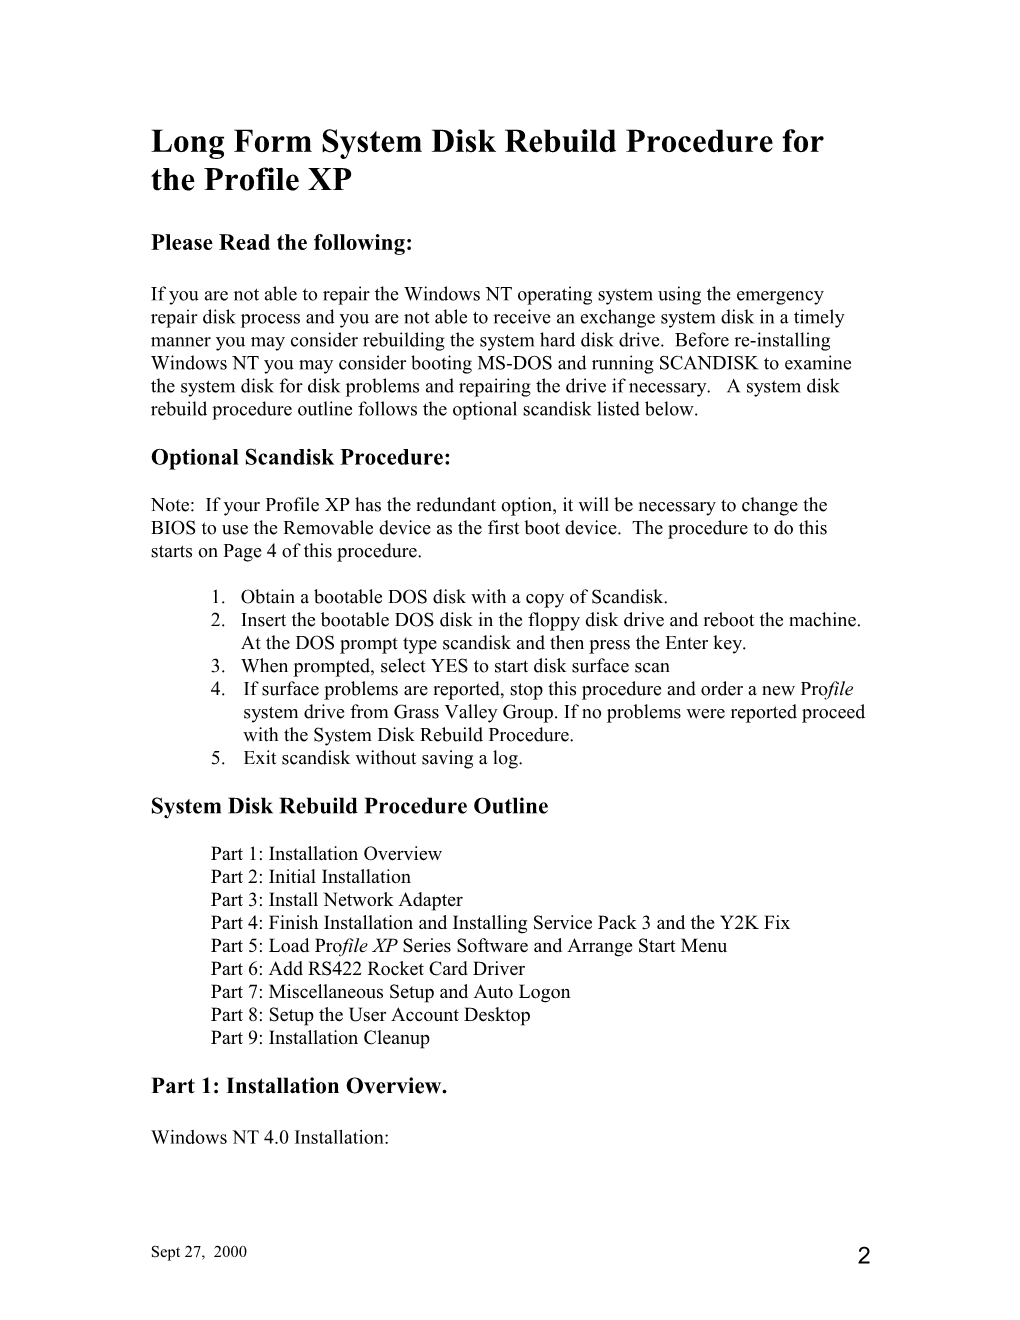 Windows NT Installation for the Profile XP